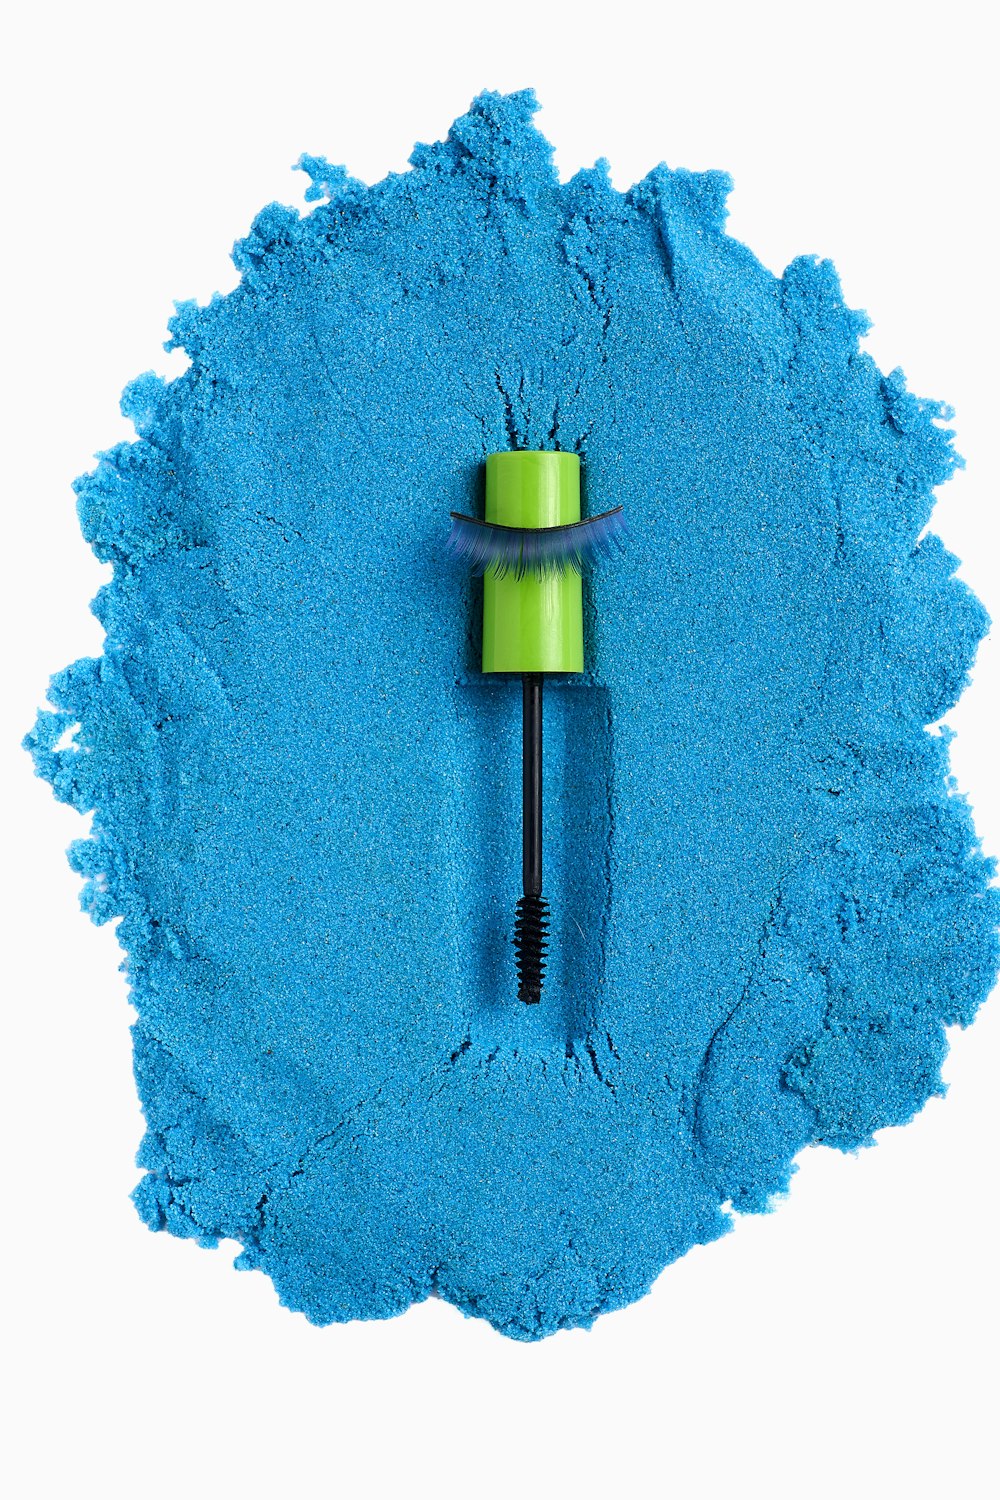 a blue powder with a green brush on top of it